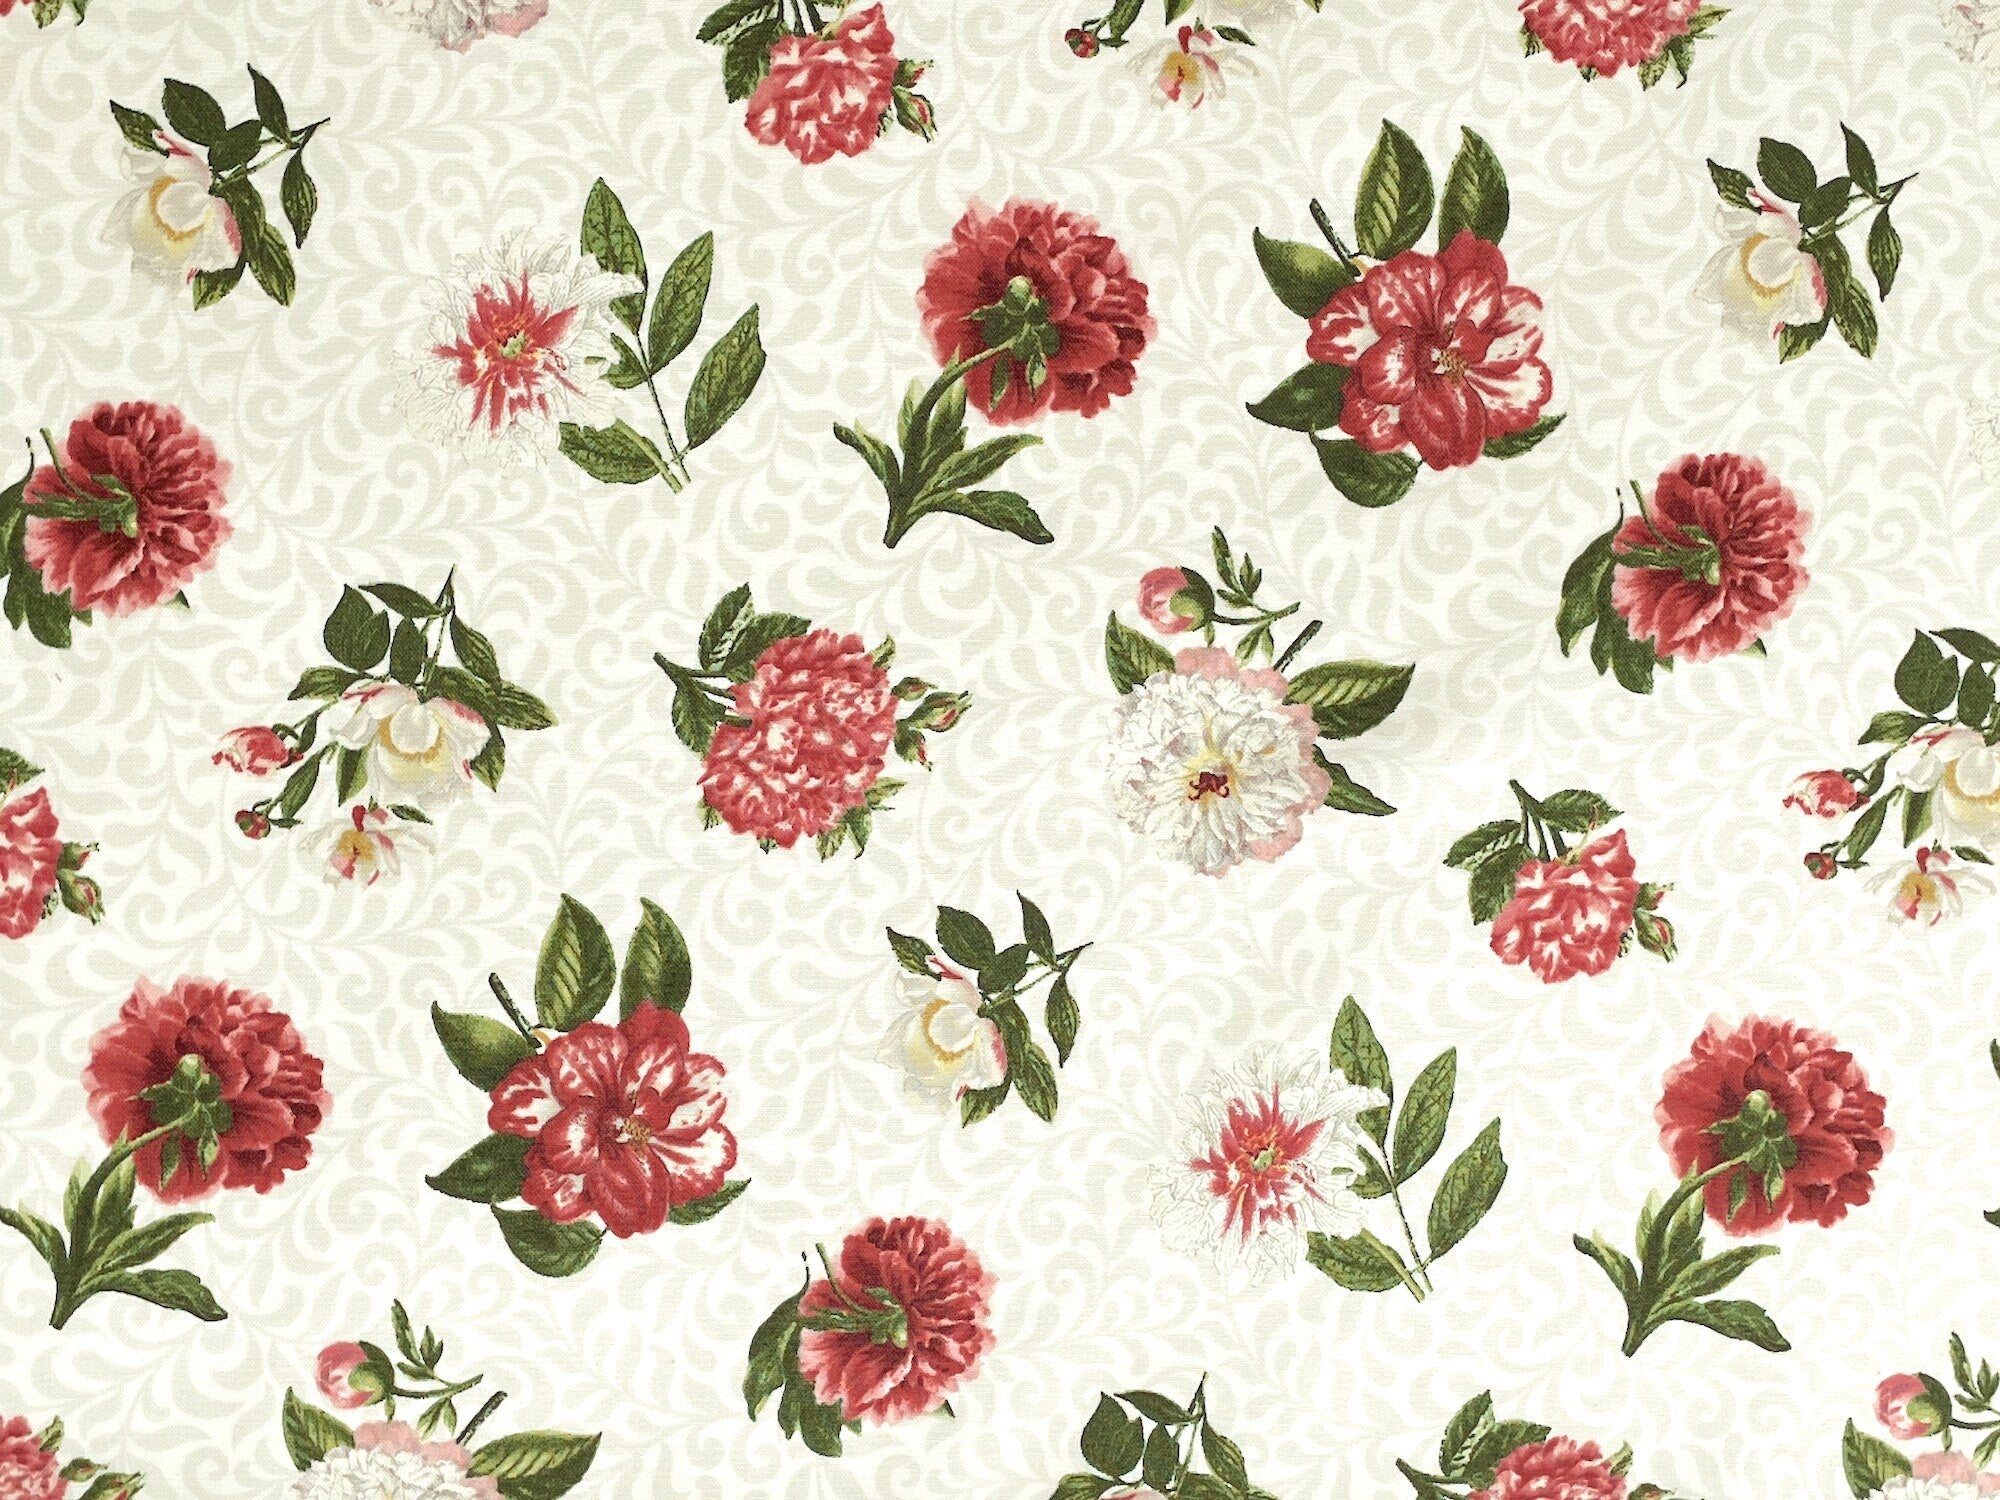 White cotton fabric covered with red and white peonies.